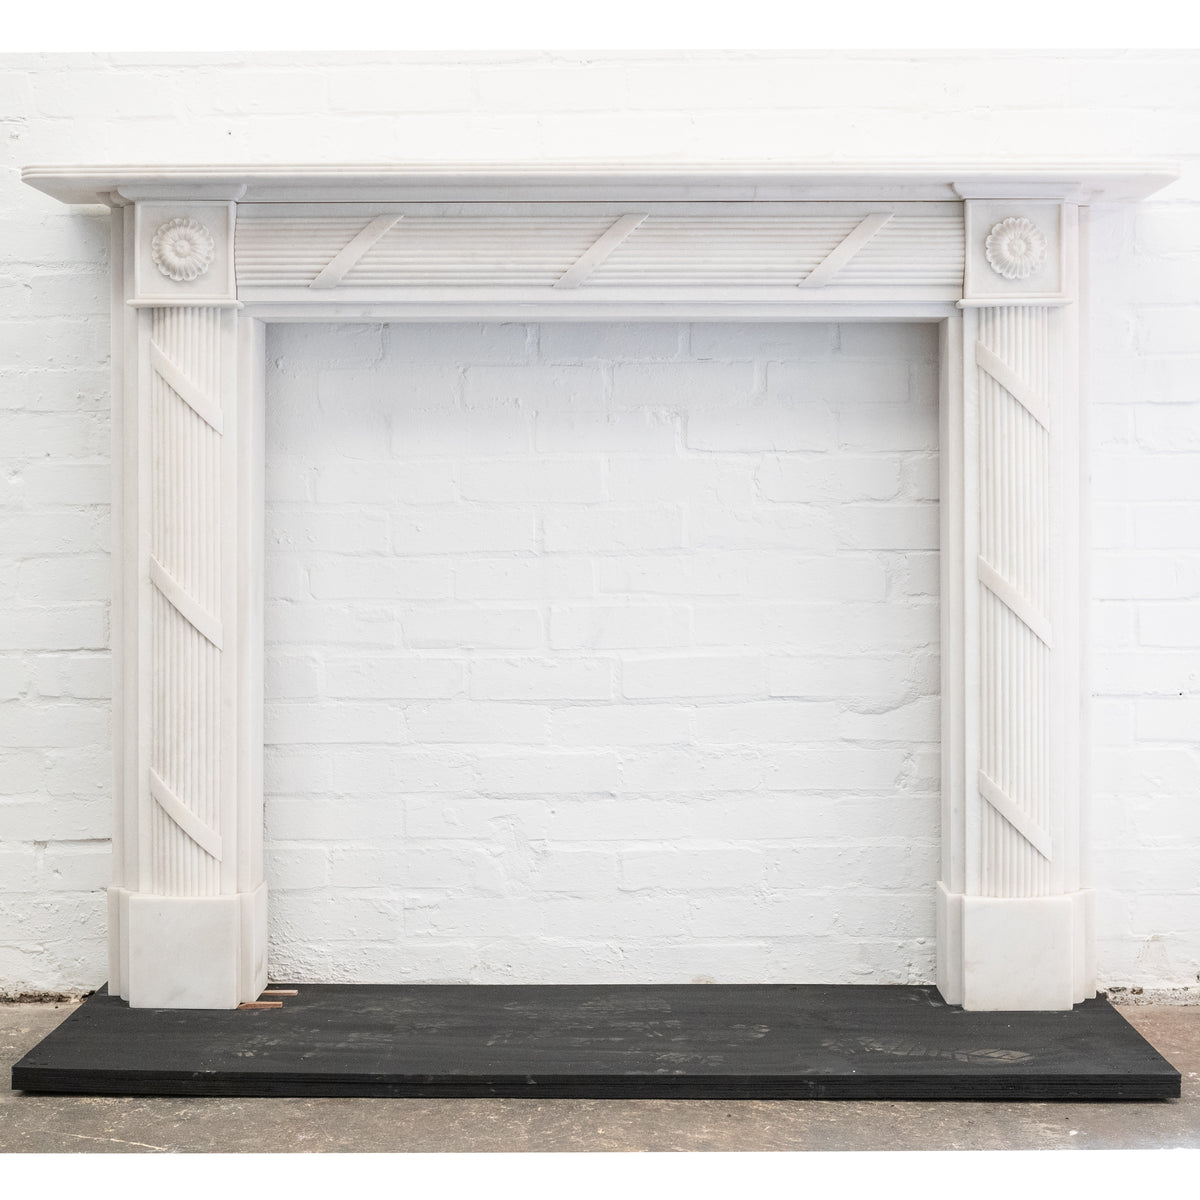 Regency Style Statuary Marble Fireplace Surround | The Architectural Forum